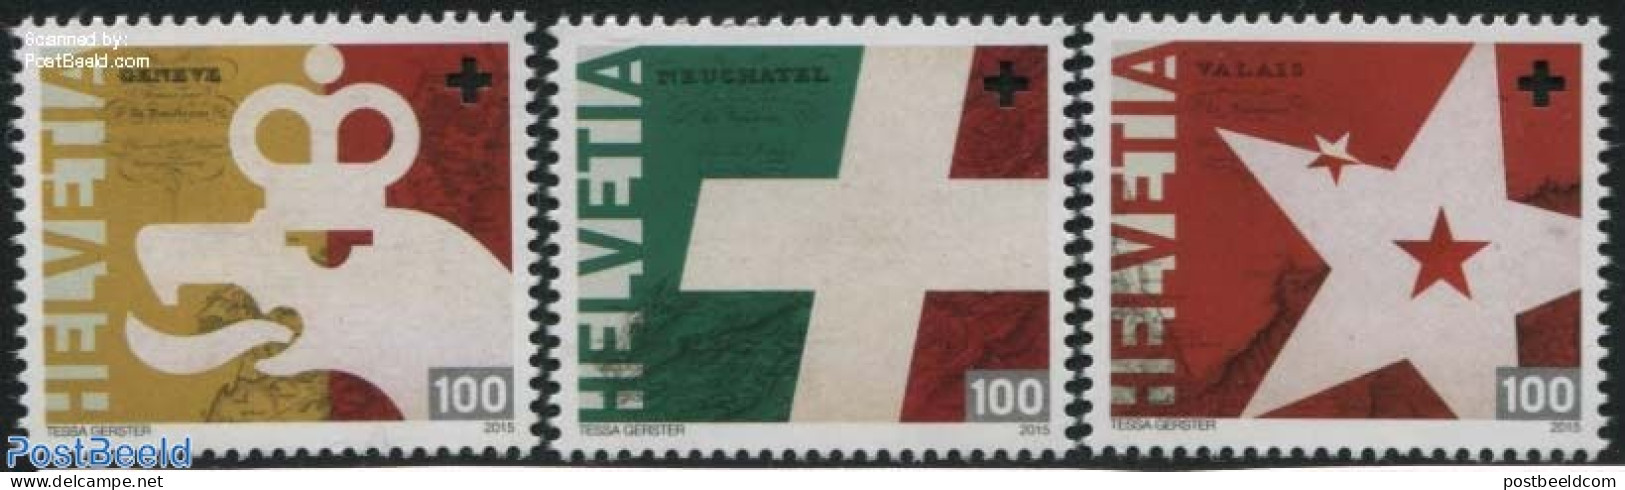 Switzerland 2015 Accession Of Geneve, Neuchatel & Valais 3v, Mint NH, History - Various - Coat Of Arms - History - Maps - Unused Stamps